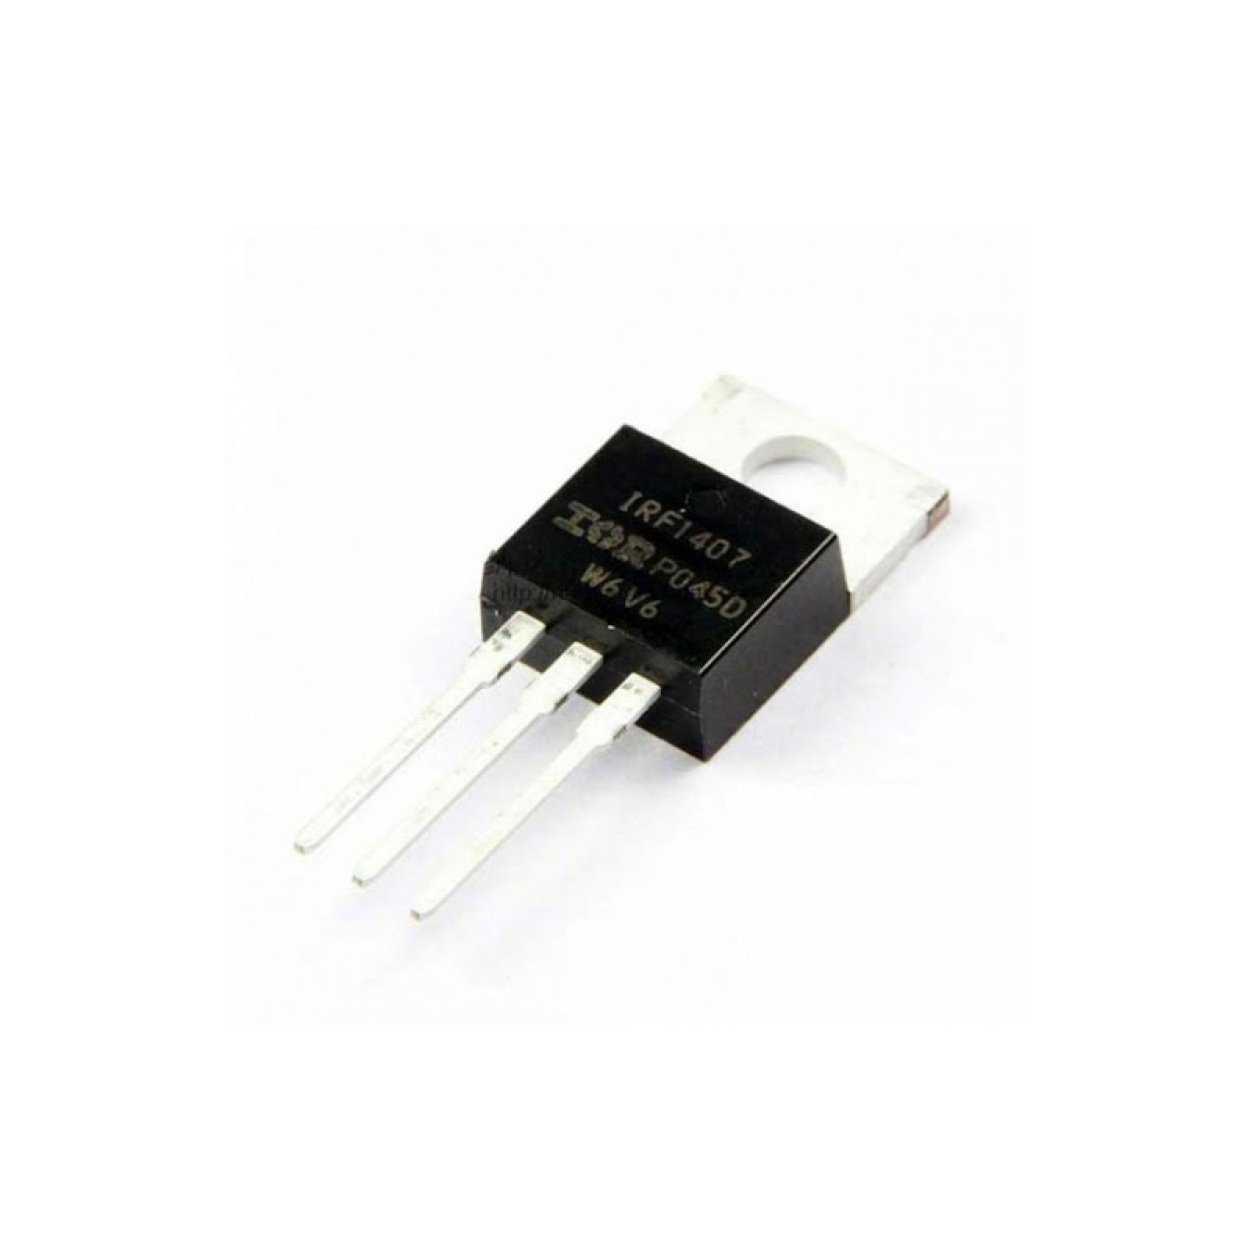 Probots IRF1407 MOSFET N-Channel HEXFET Power MOSFET TO-220 Package ...